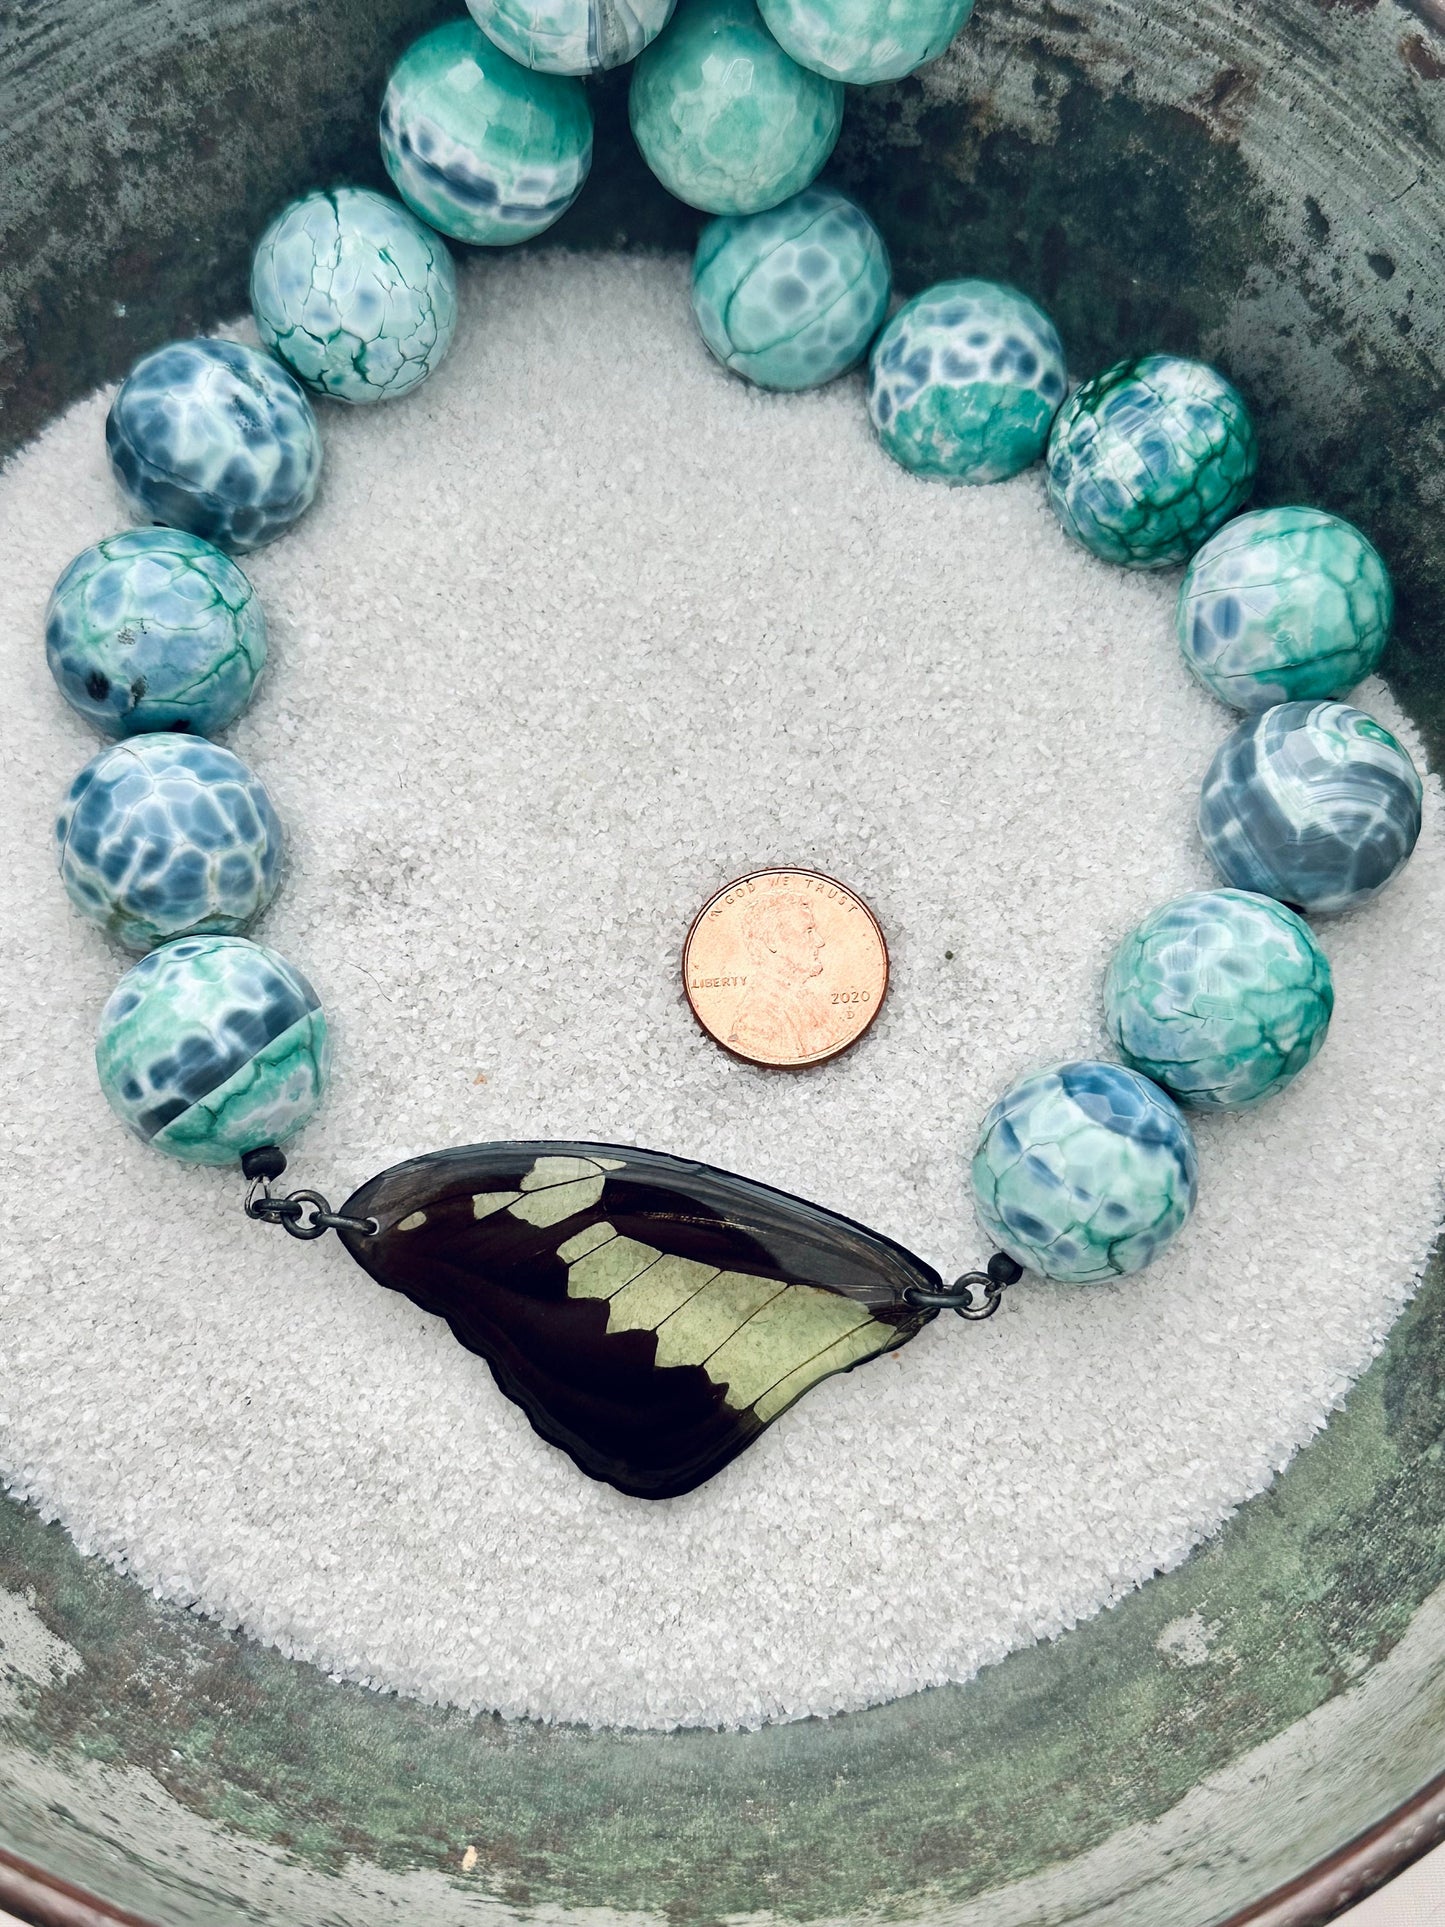 Real Green Apple Swallowtail Butterfly Necklace (Papilio phorcas) with Giant Faceted Blue Lace Agate Beads and Sterling Silver